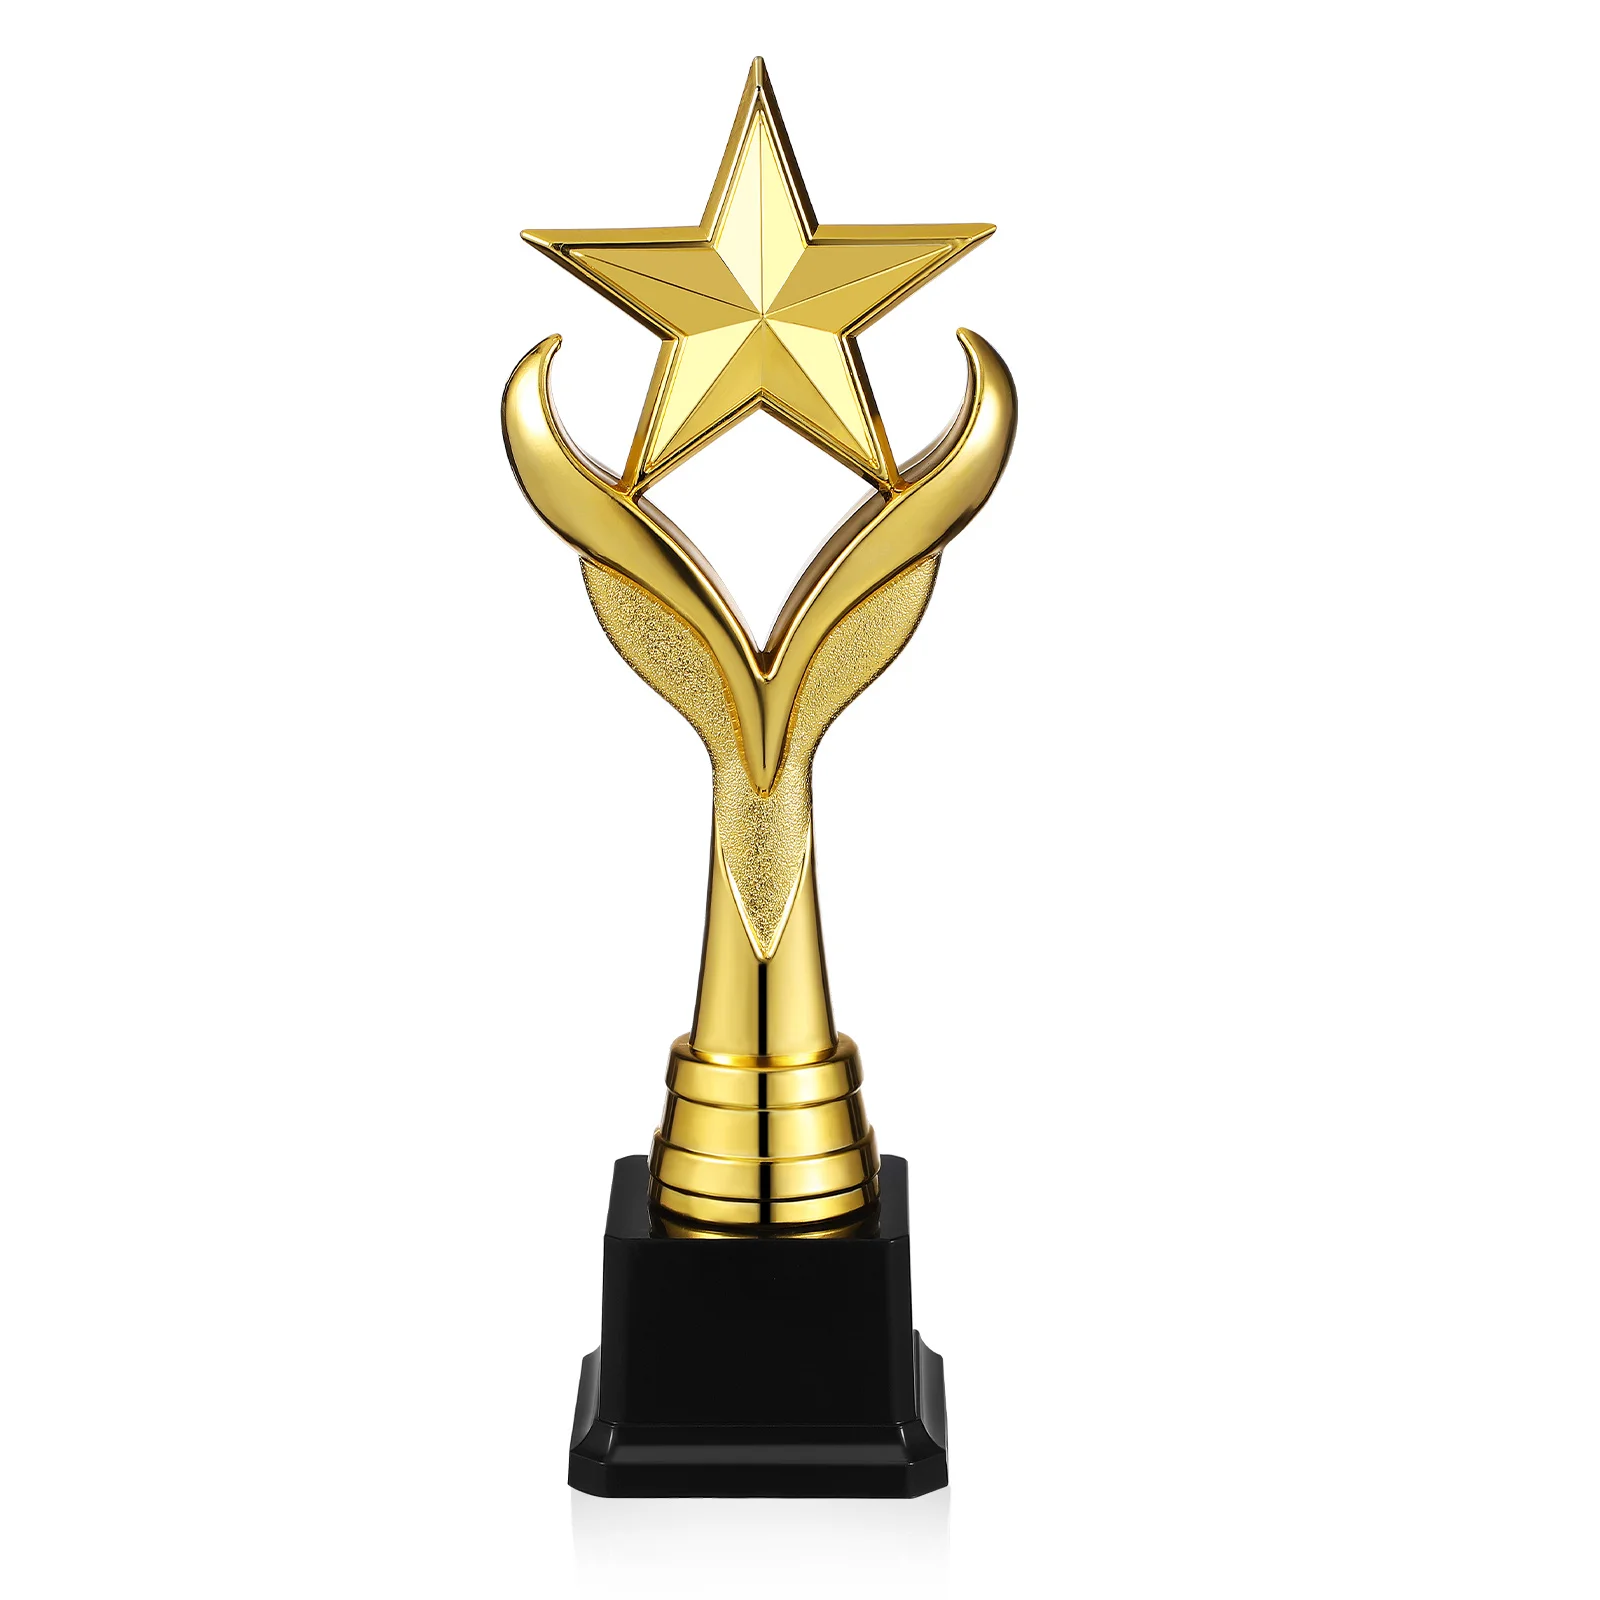 Creative Trophy Award Decor for Sports Party Competition Celebrity Pentacle Awards and Trophies Plastic Winner